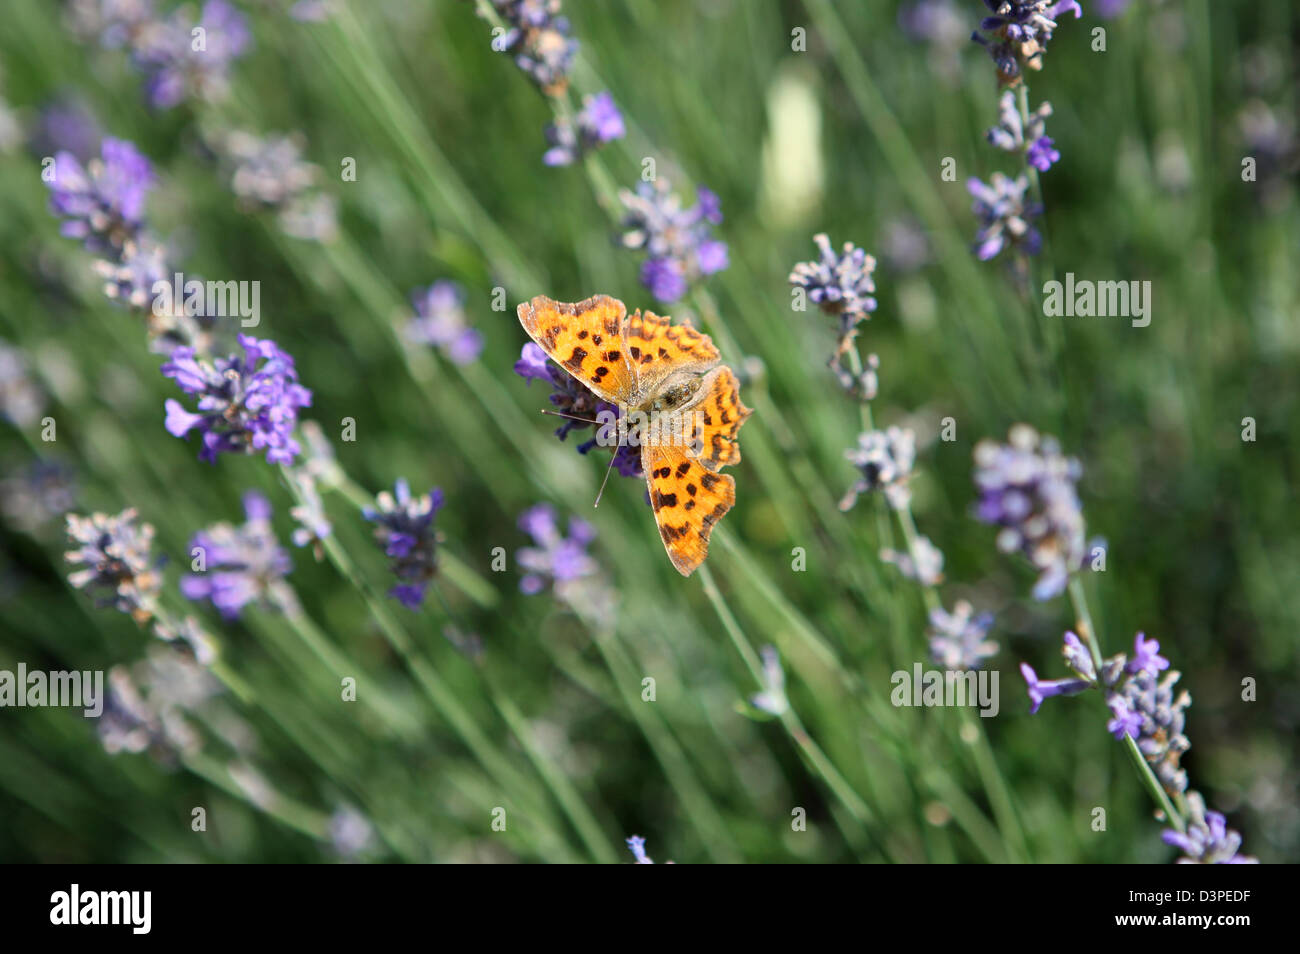 Comma butterfly resting or feeding on English lavender flowers Stock Photo